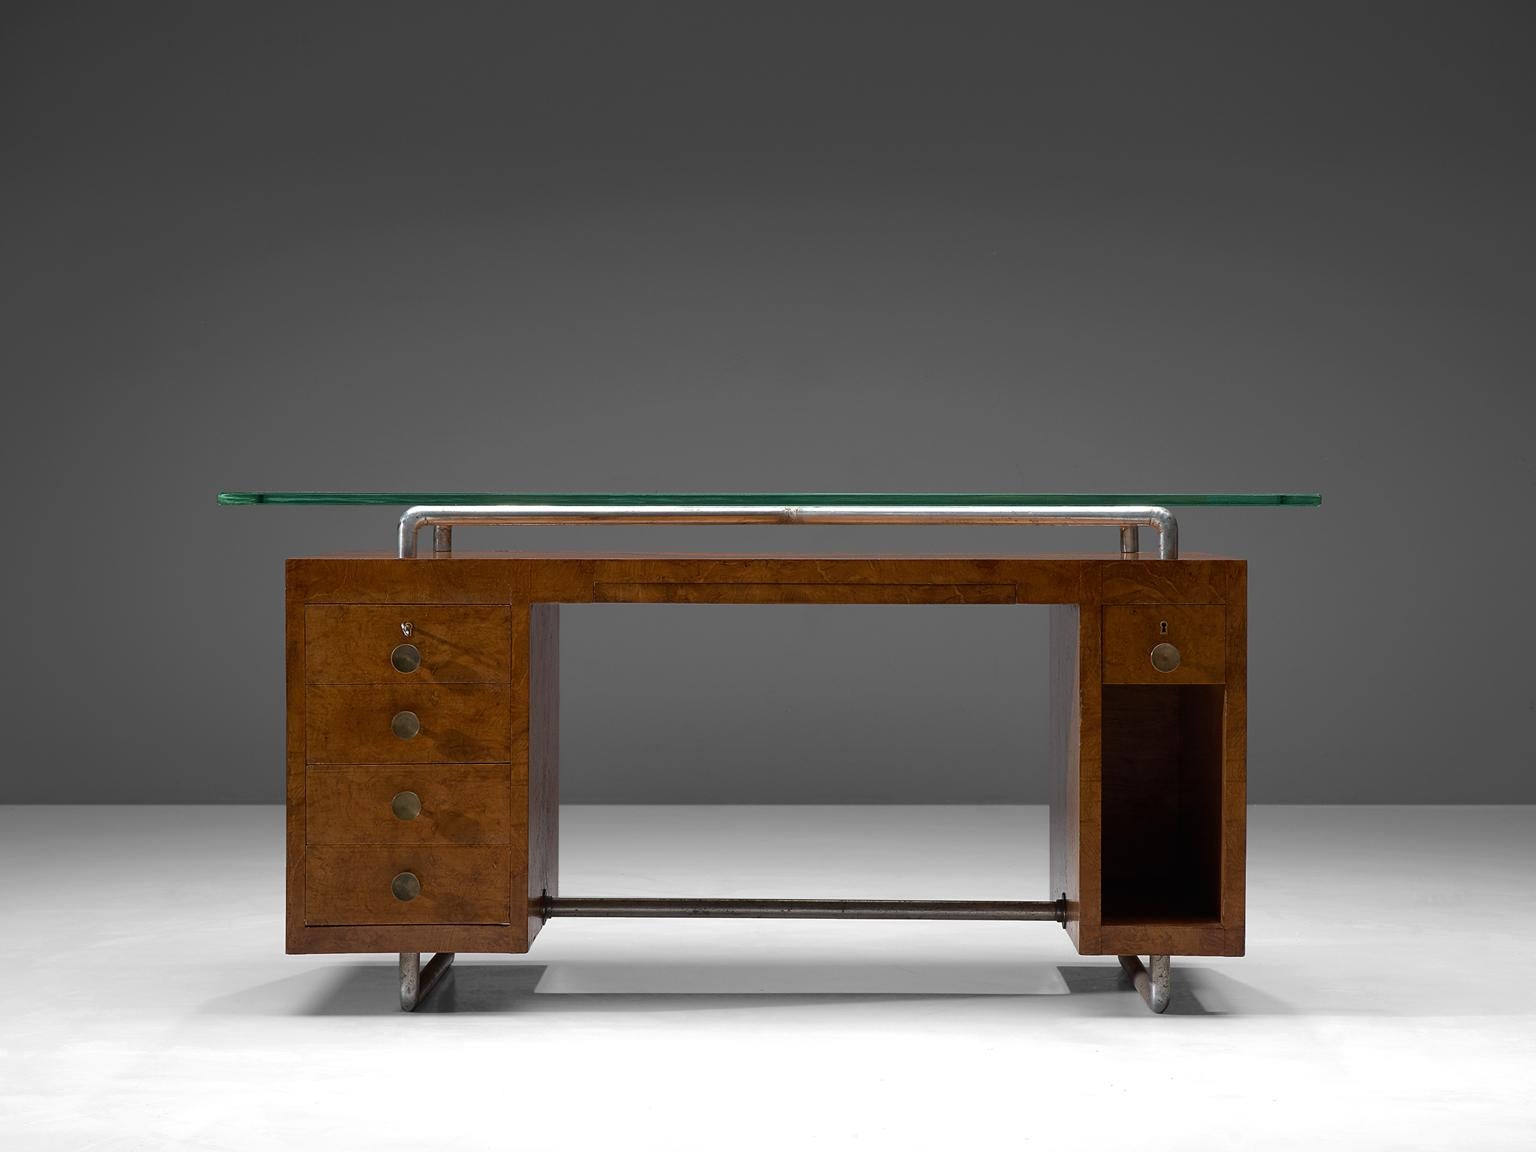 Pietro Lingeri, desk, briar root veneer, glass, brass and metal, Italy, 1930s.

This rationalist desk is designed by the Italian architect Pietro Lingeri. As can be seen in this chunky, strong piece, Lingeri wasn't shy to use innovative materials